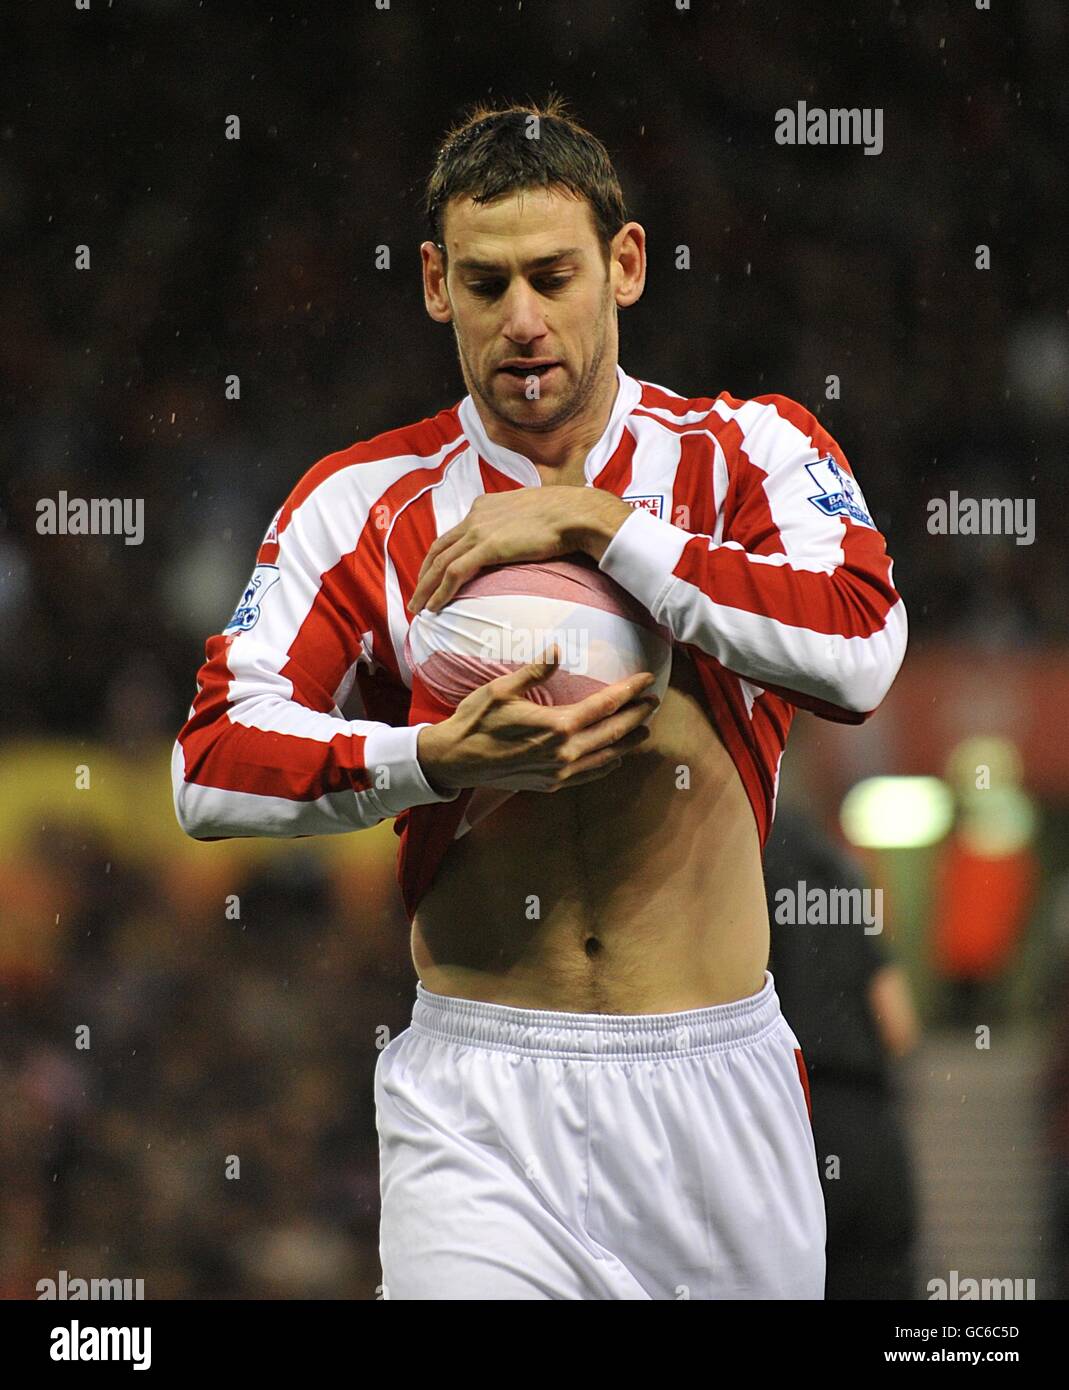 Soccer - Barclays Premier League - Stoke City v Portsmouth - Britannia Stadium. Stoke City's Rory Delap dries the ball with his shirt before launching one of his trademark throw ins Stock Photo